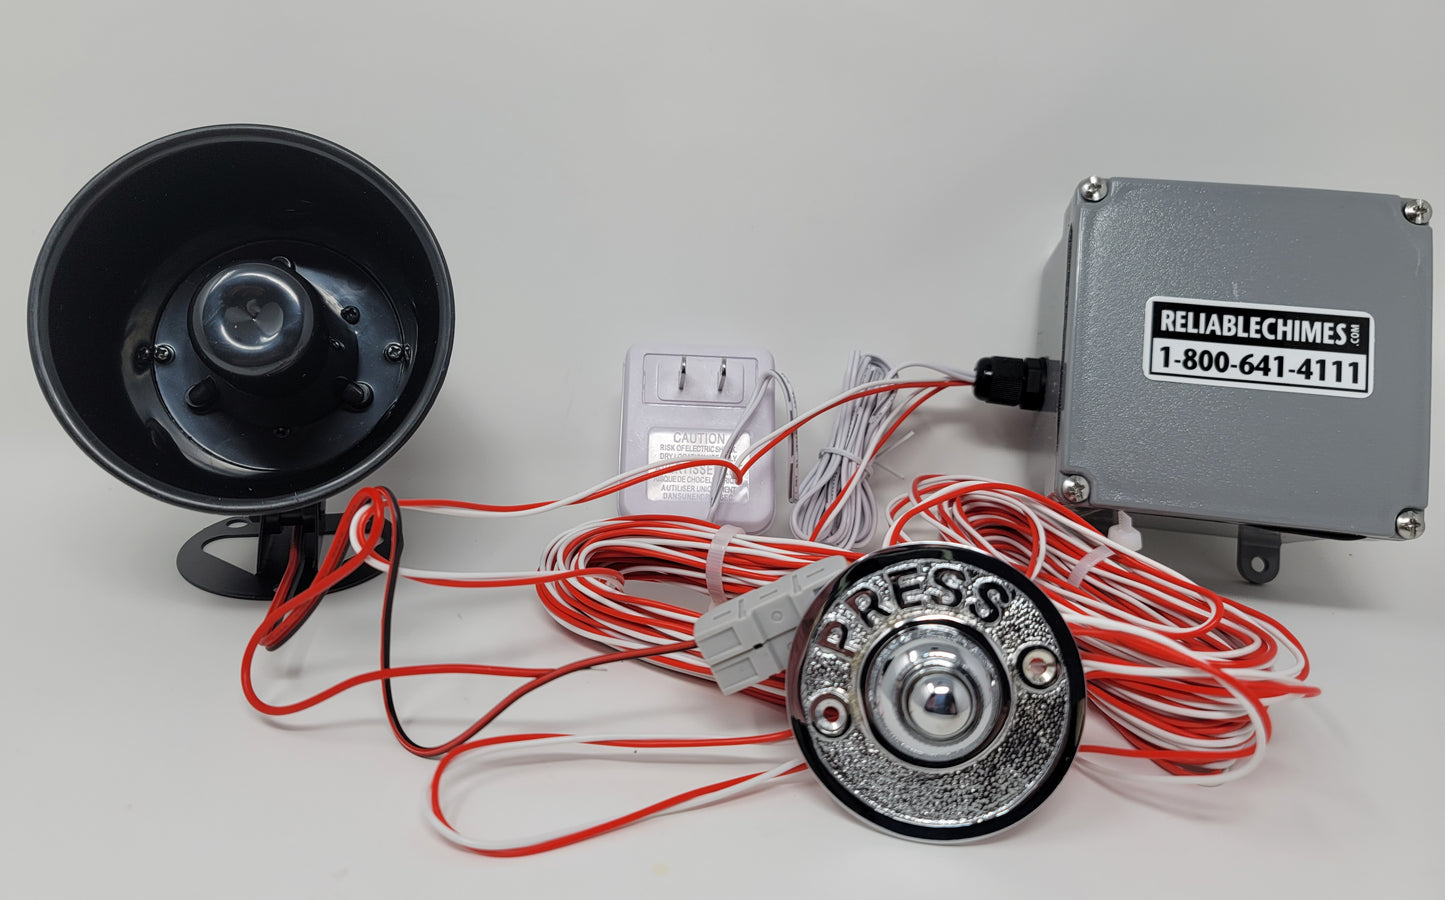 Wired Warehouse Door Bell with Firebell